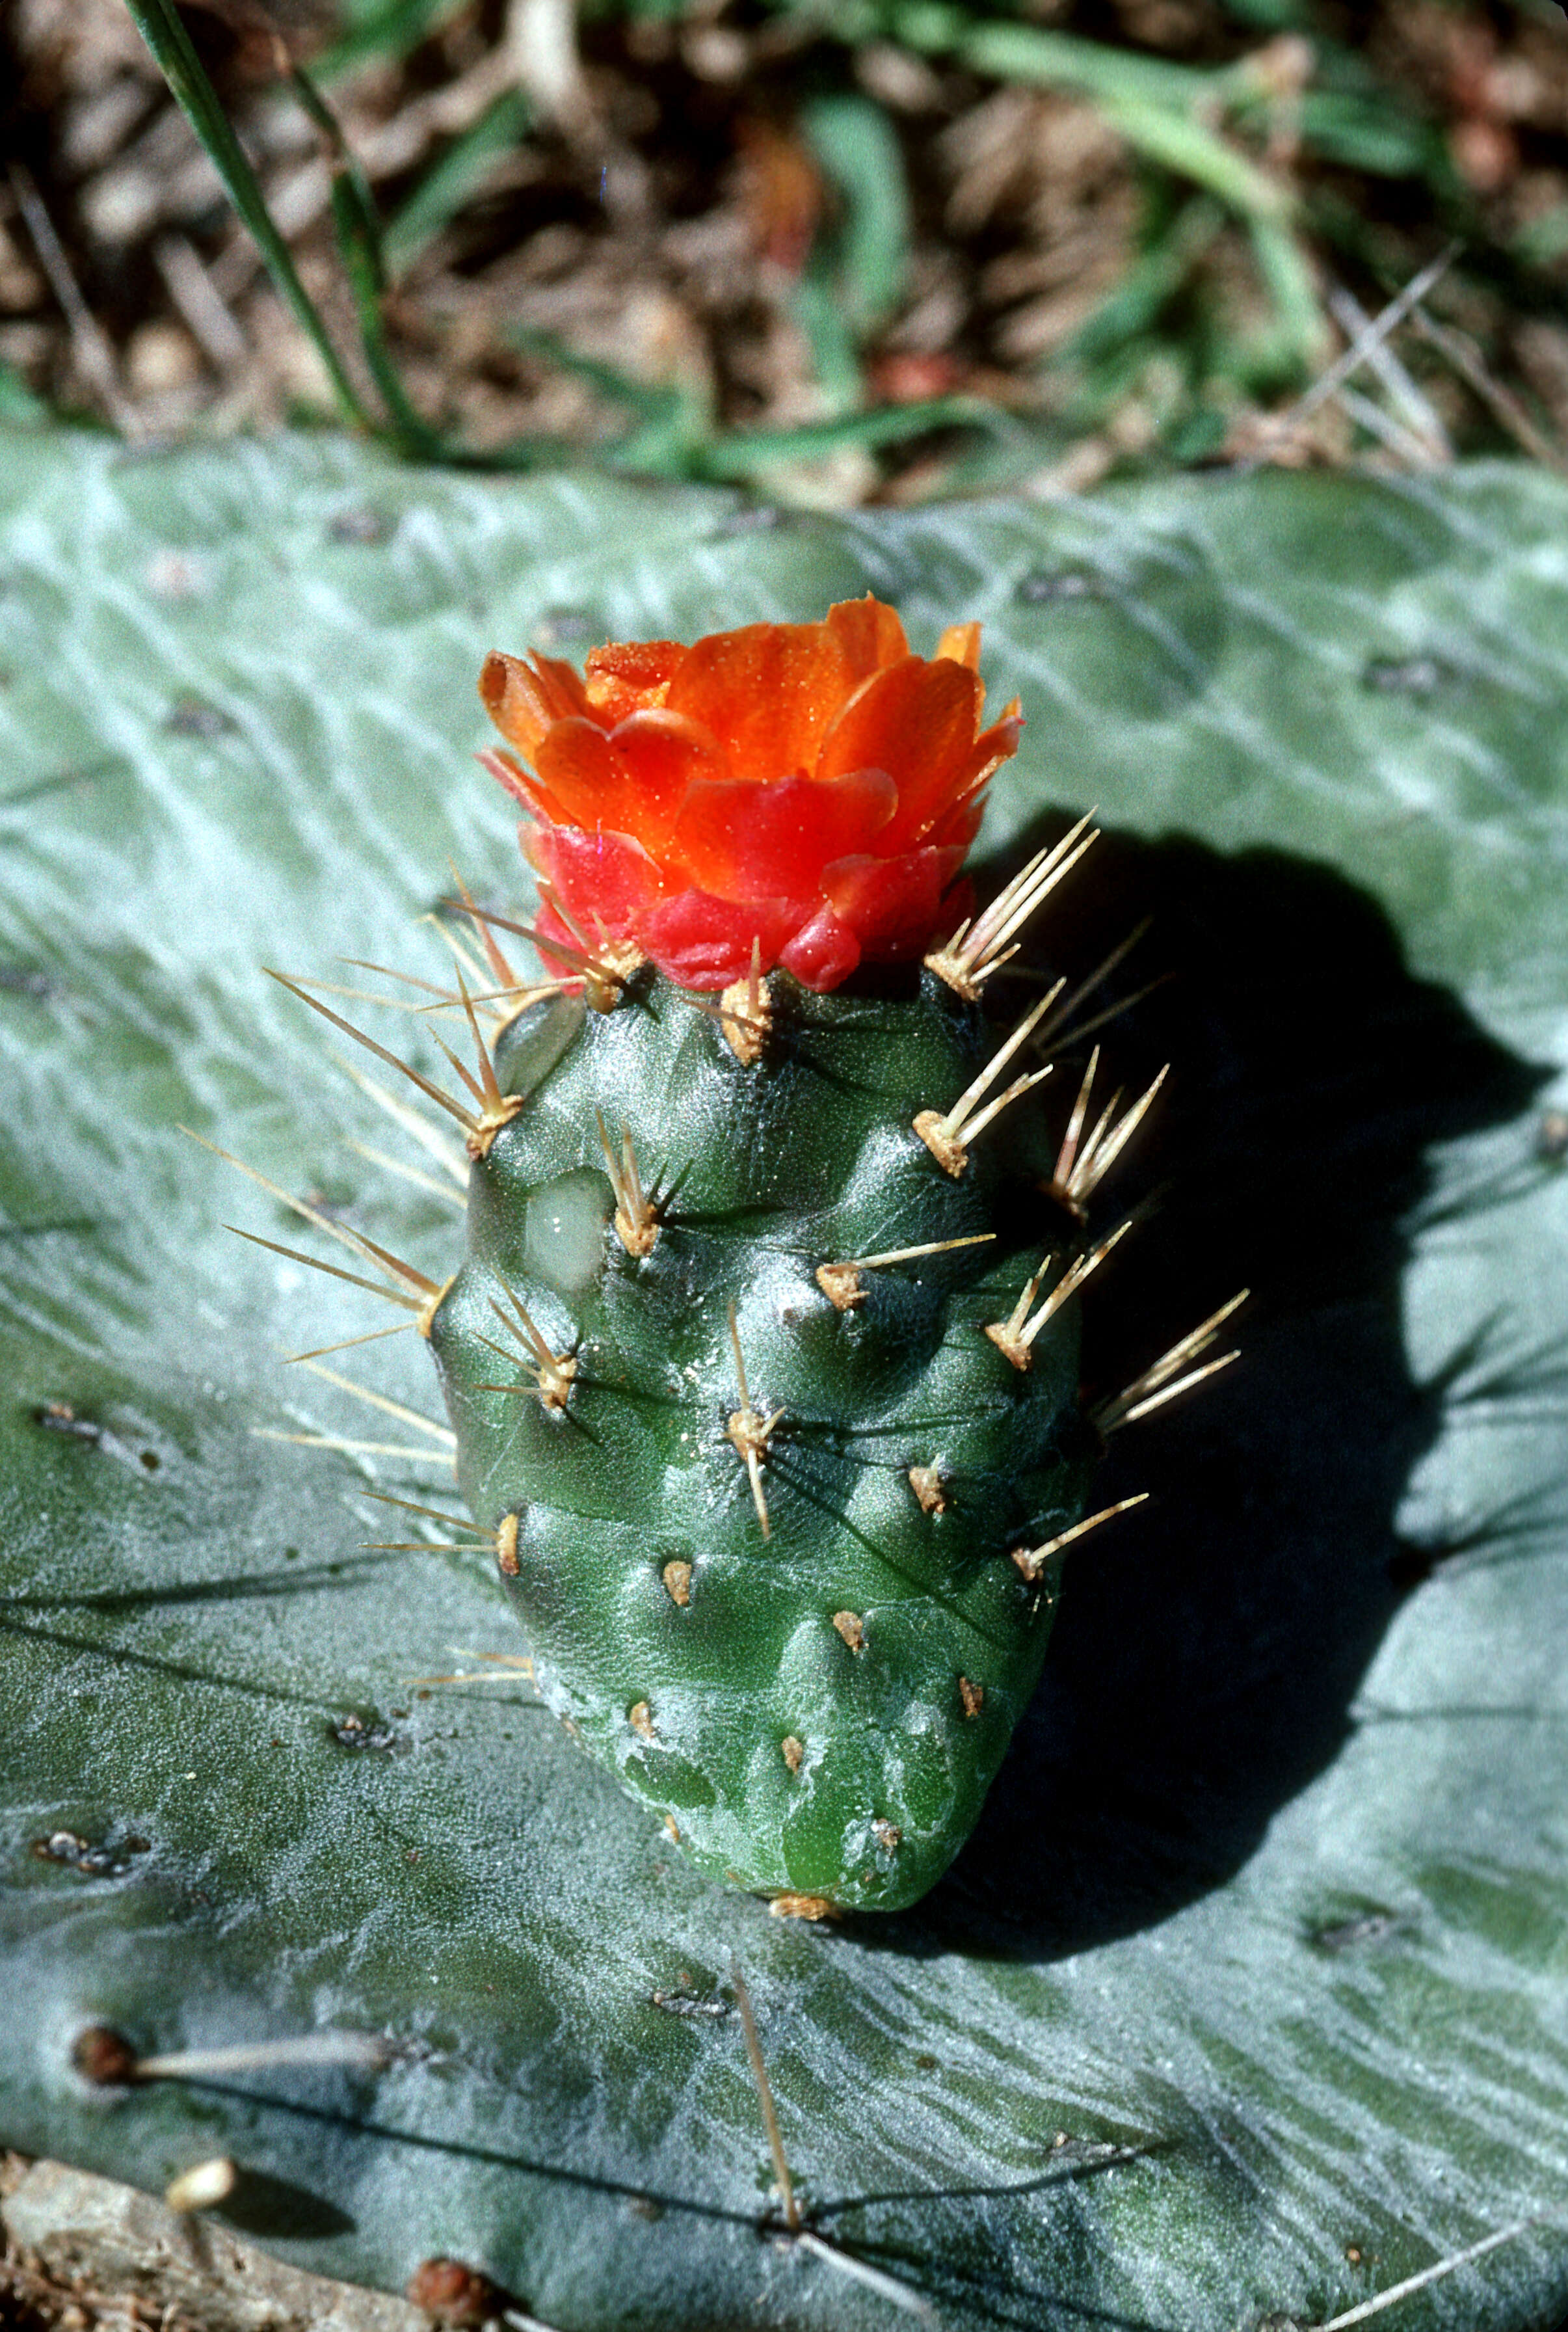 Image of sour pricklypear